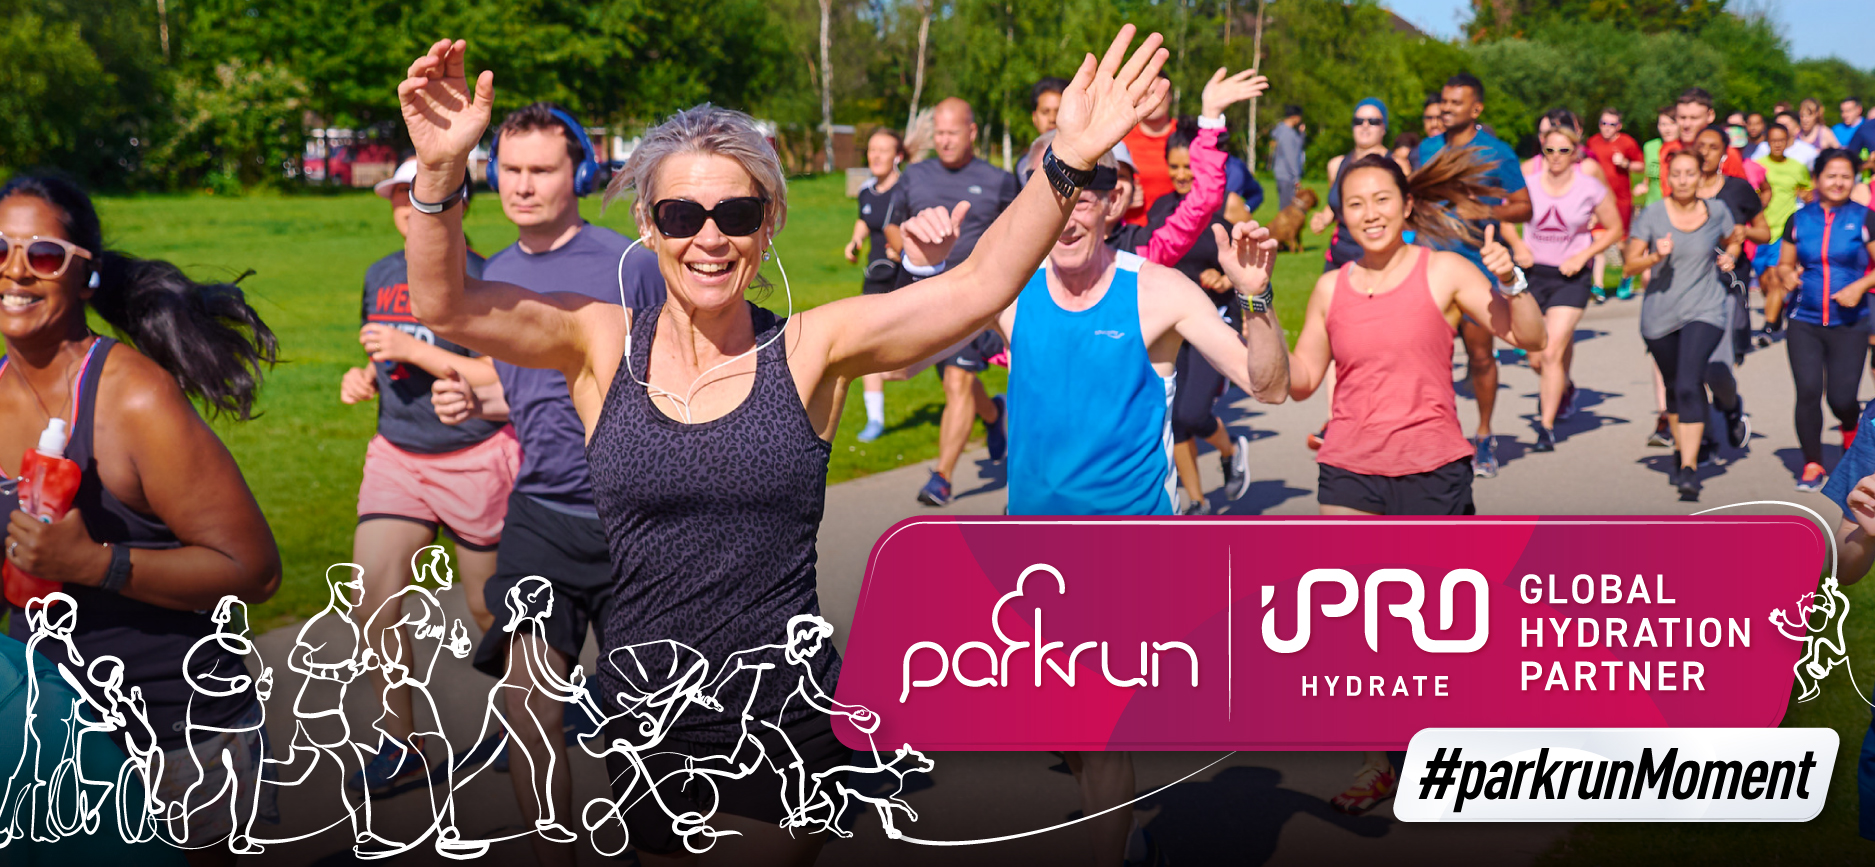 parkrun Secures Long-Term Global Partnership with iPRO Hydrate